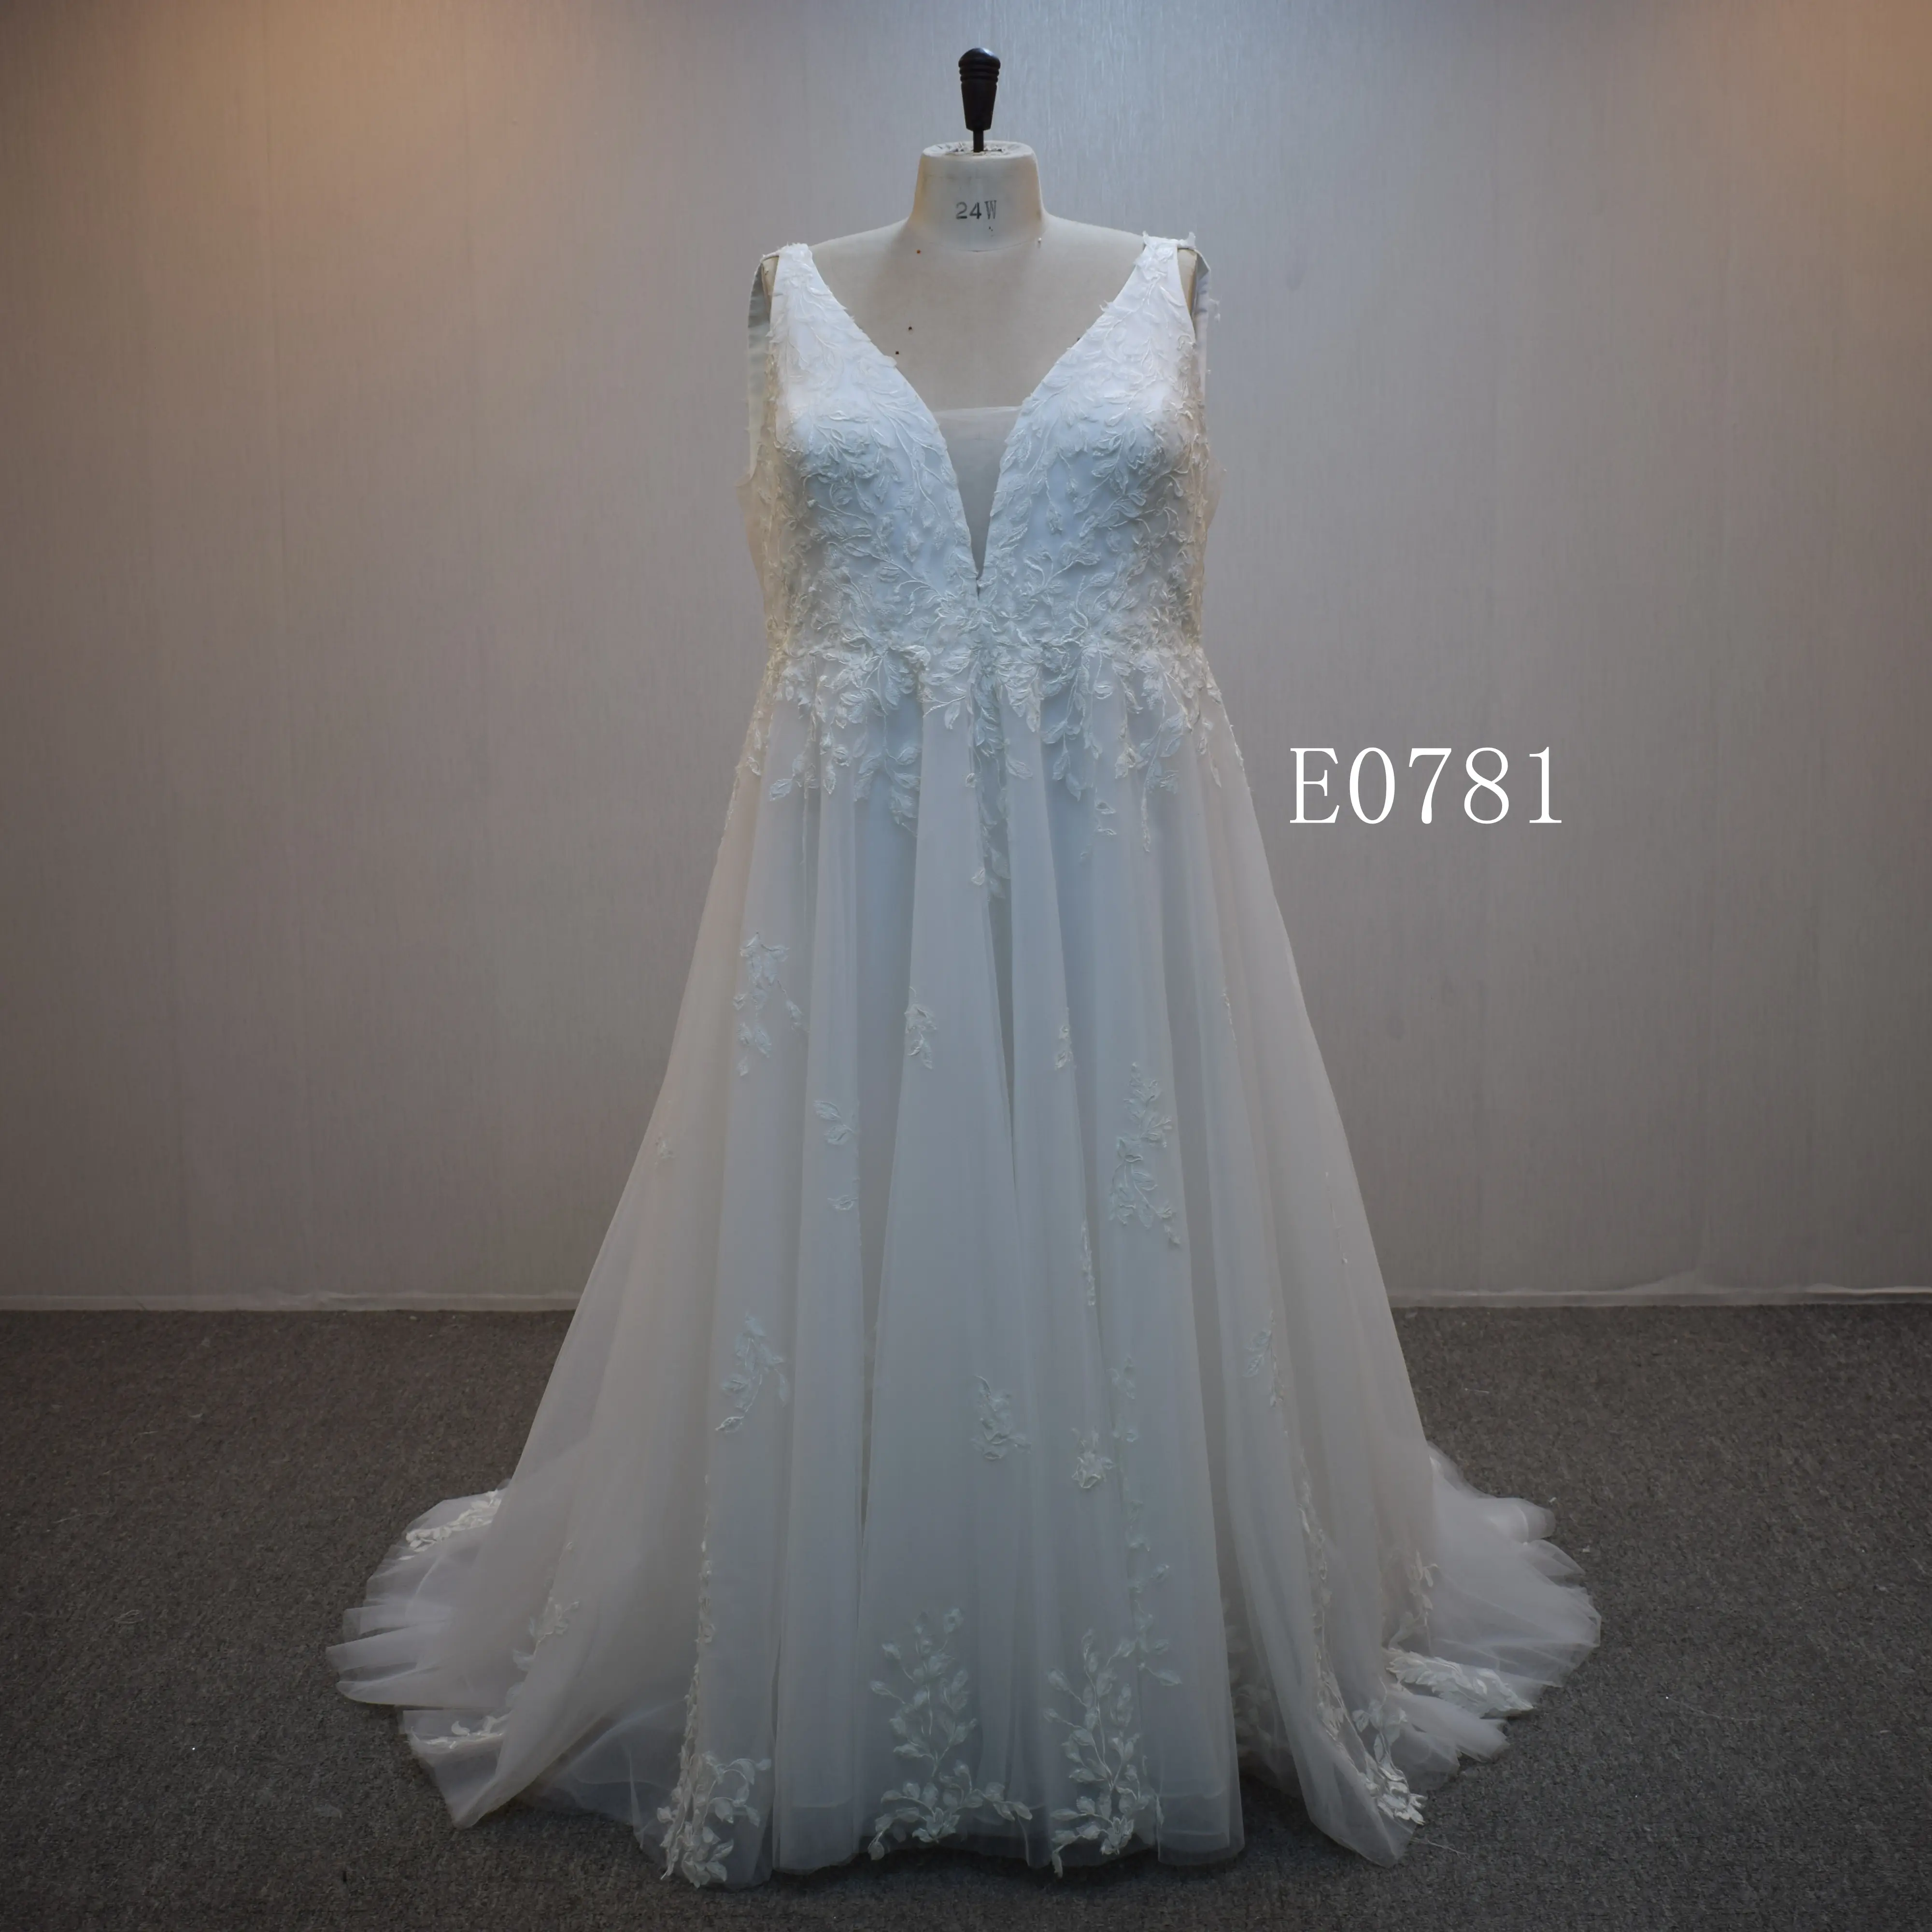 New Collection Sleeveless Ivory Bridal Dress V-neckline Lace Wedding Gown with Zipper